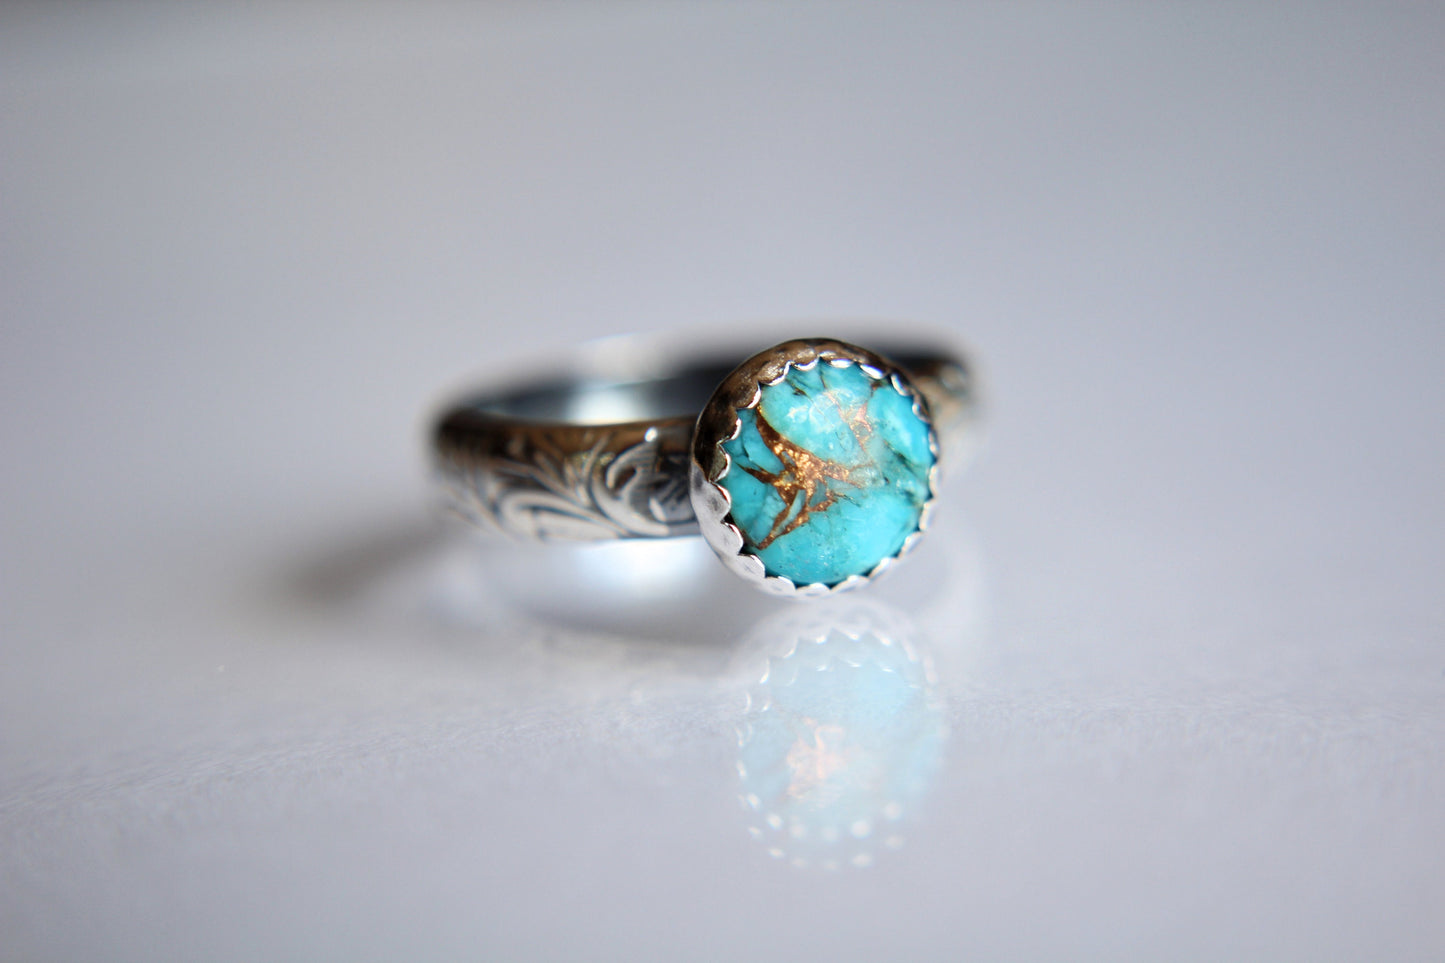 Floral Turquoise Ring, Floral Band, Turquoise Floral Ring, Antique Silver Ring, Boho Statement Band, Floral Jewelry, Thick Floral Ring, gift